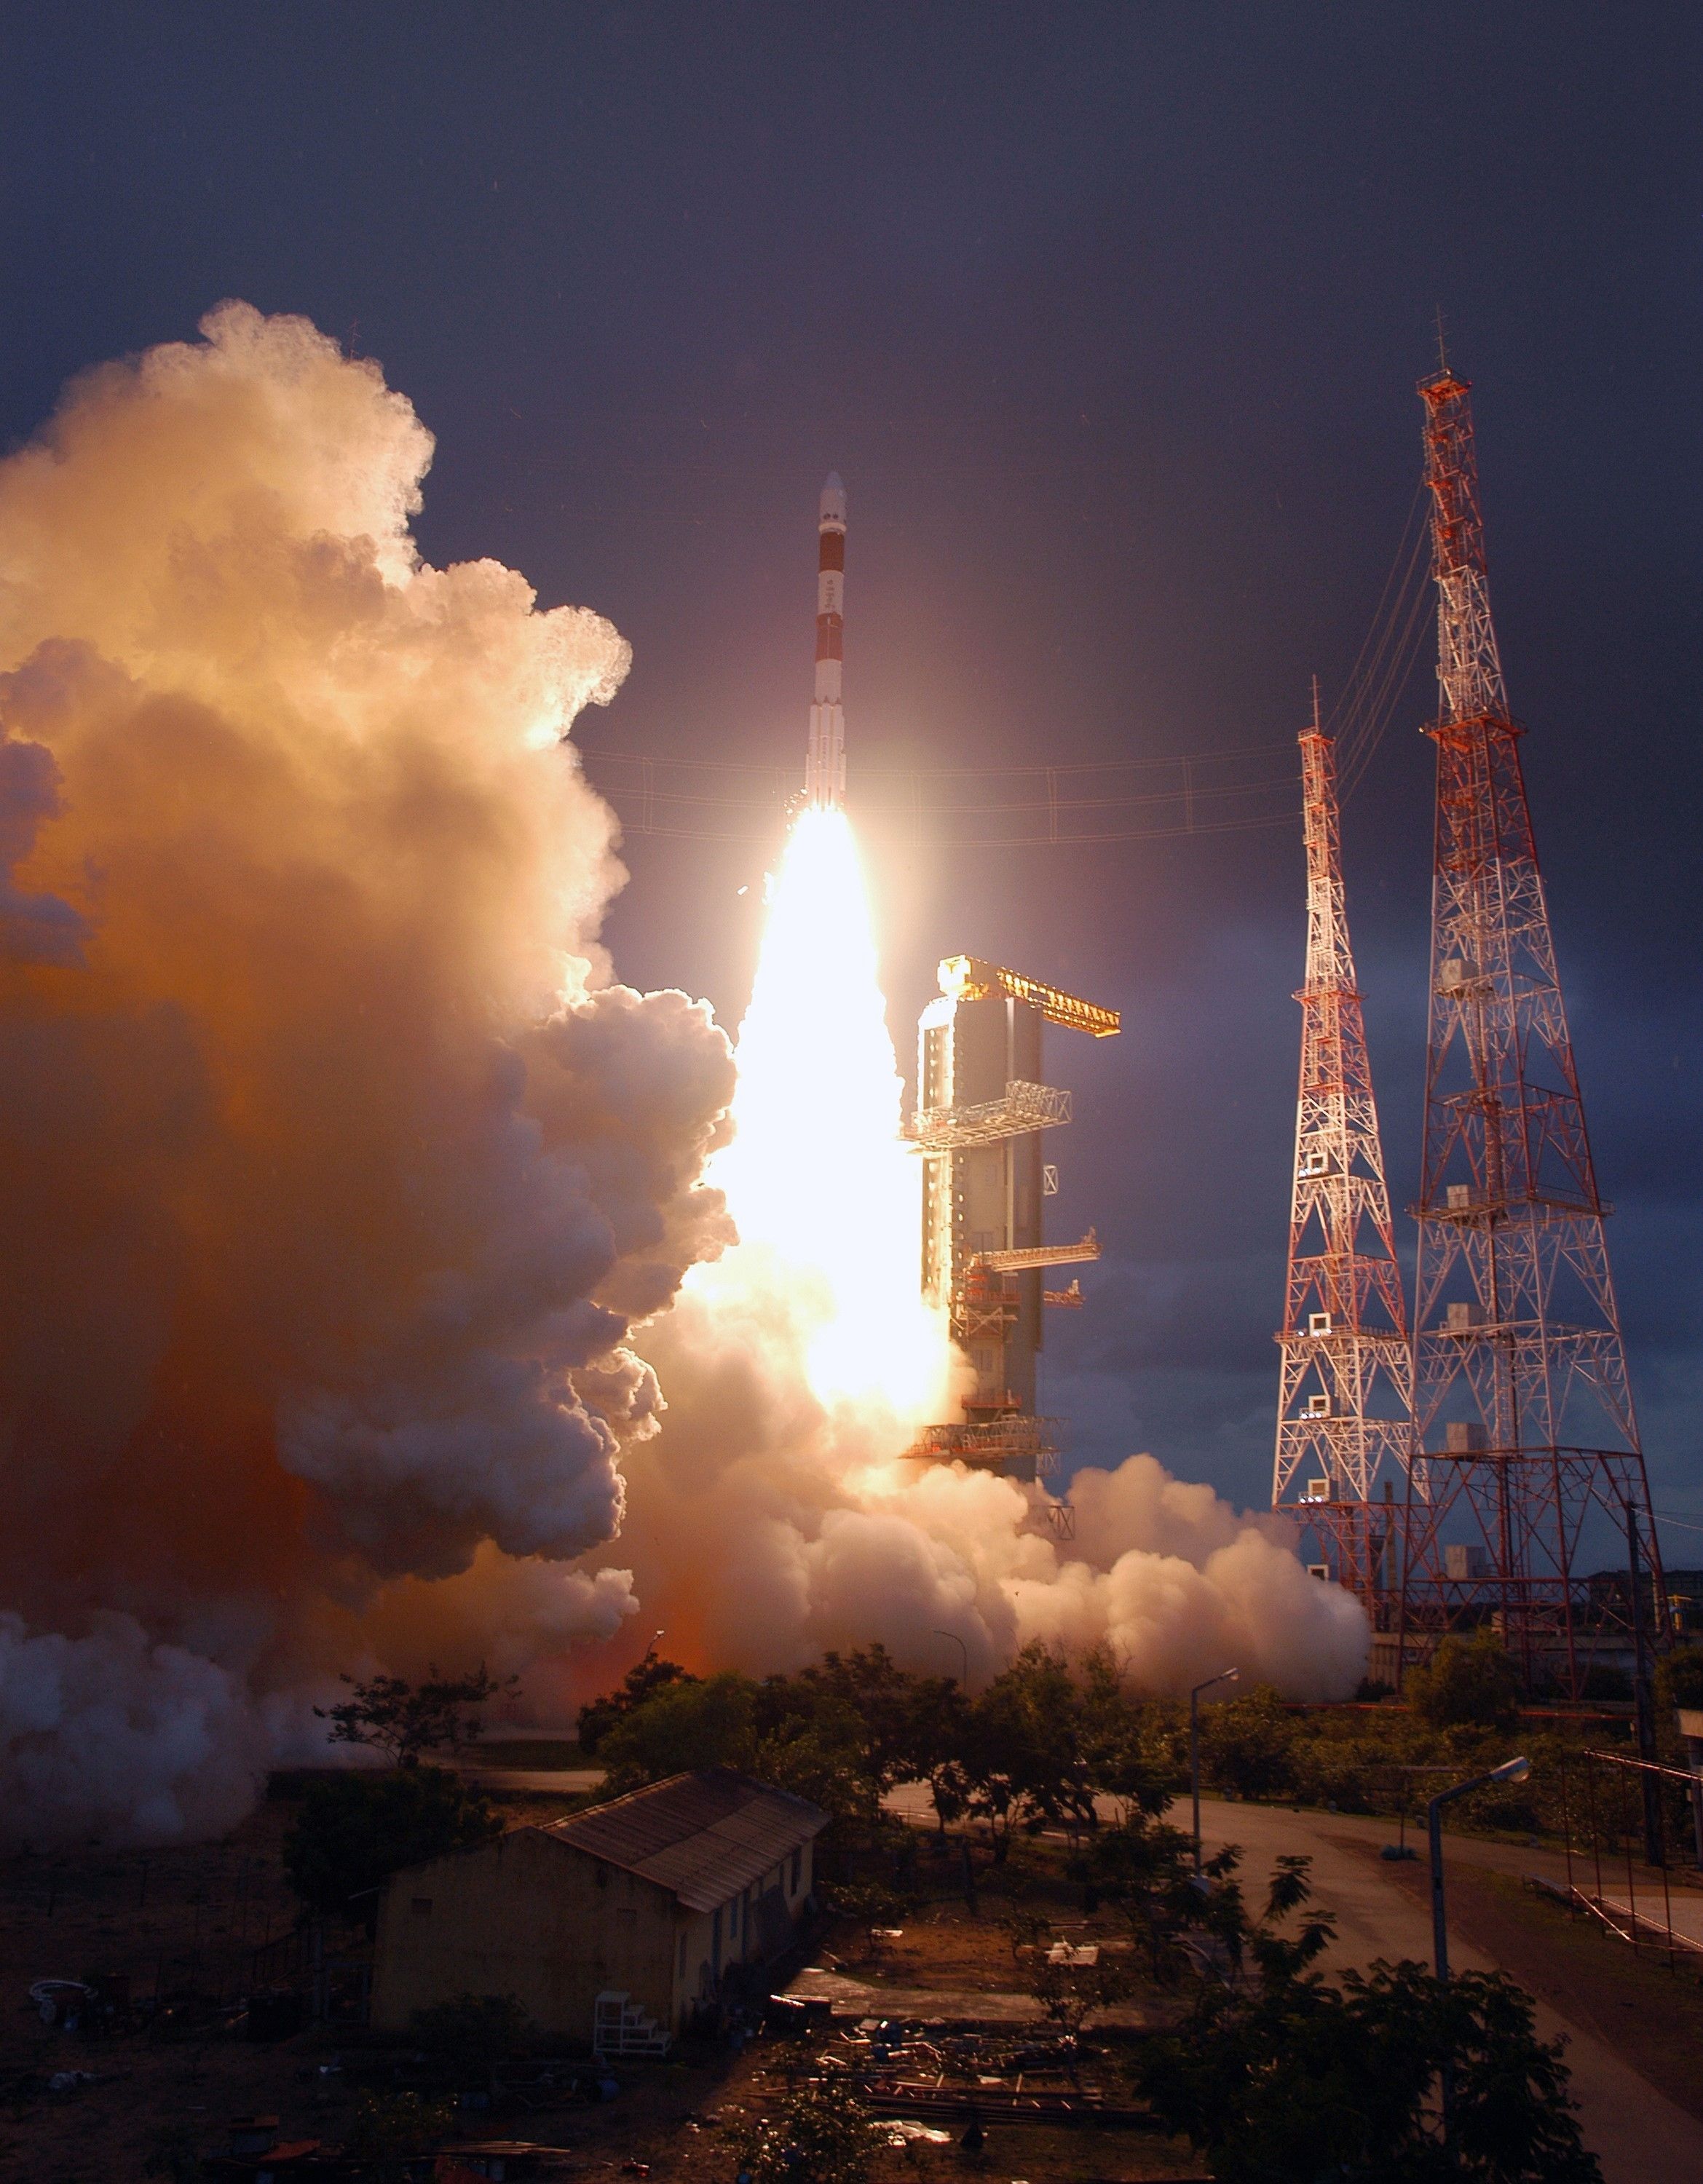 The Indian Space Research Organization, or ISRO, launches its robotic Chandrayaan-1 rocket on India's maiden moon voyage to lunar surface, parts of image furnished by NASA, July 18th, 2023, AP, India